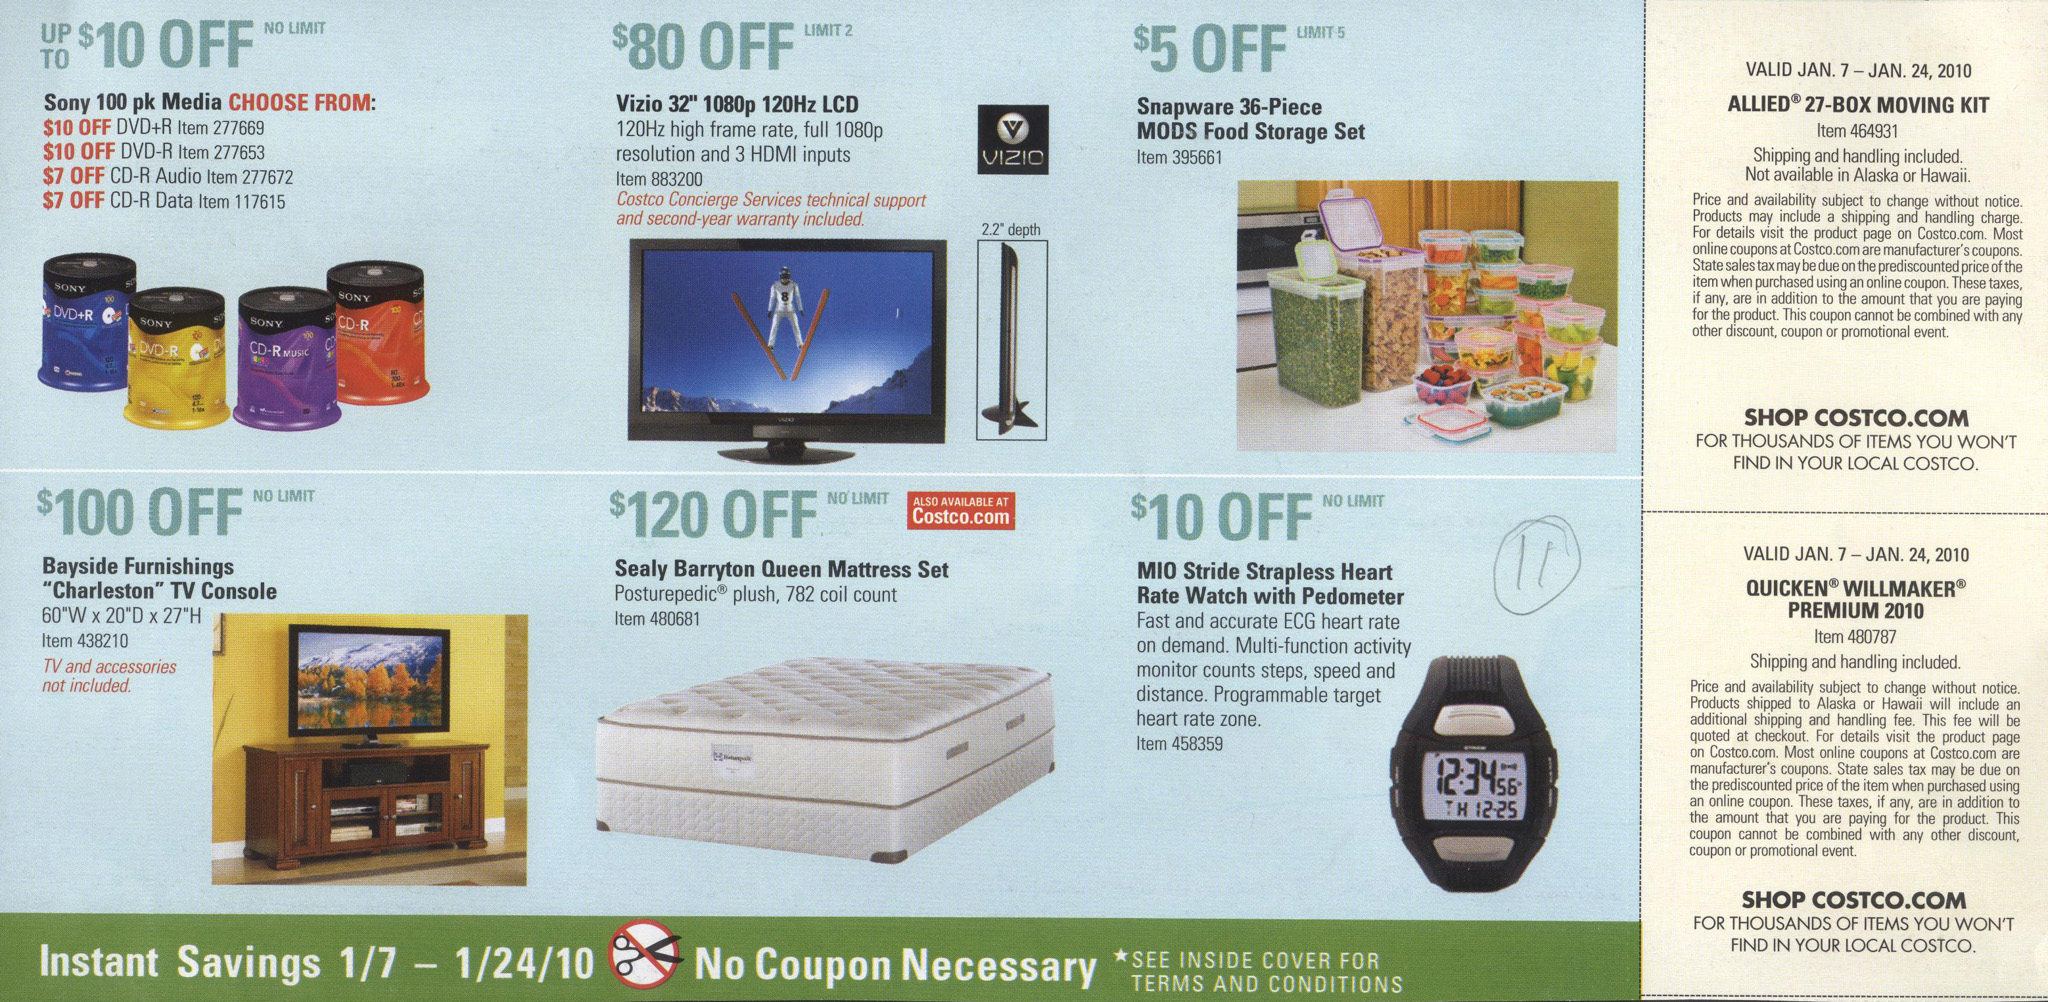 Coupon book page 11 in full-size.